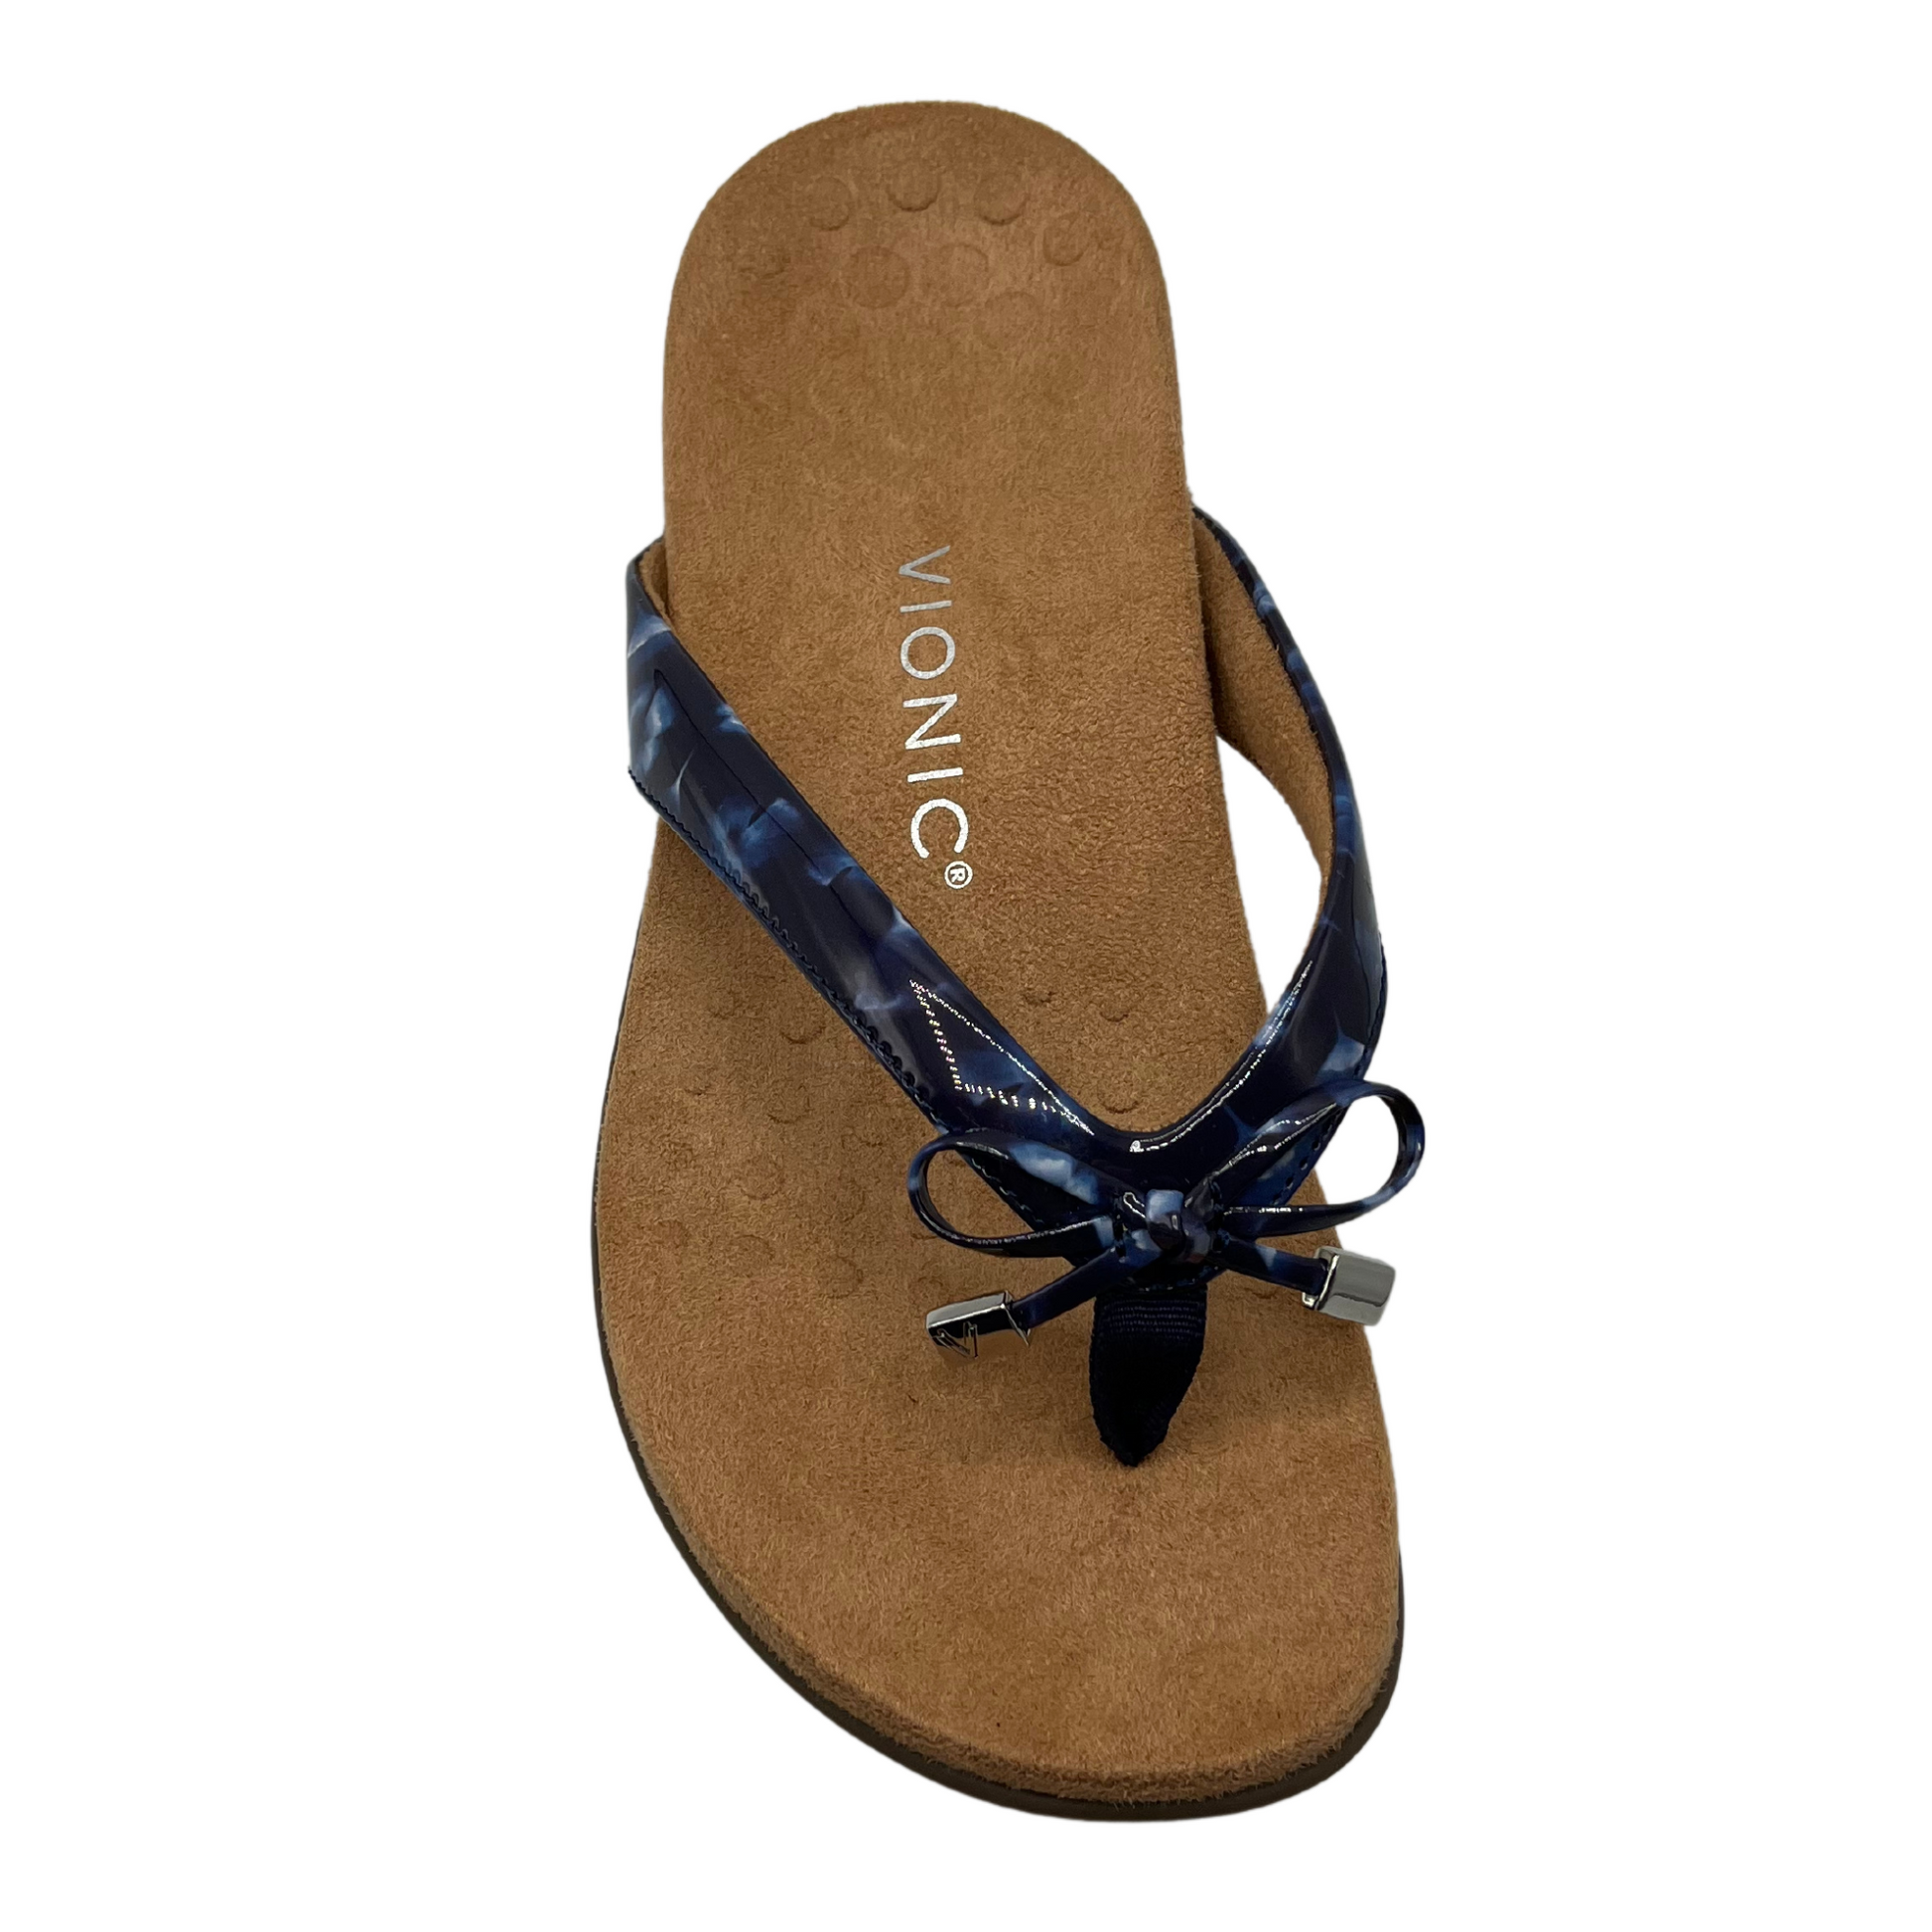 Top view of blue strapped sandal with microfibre footbed and arch support